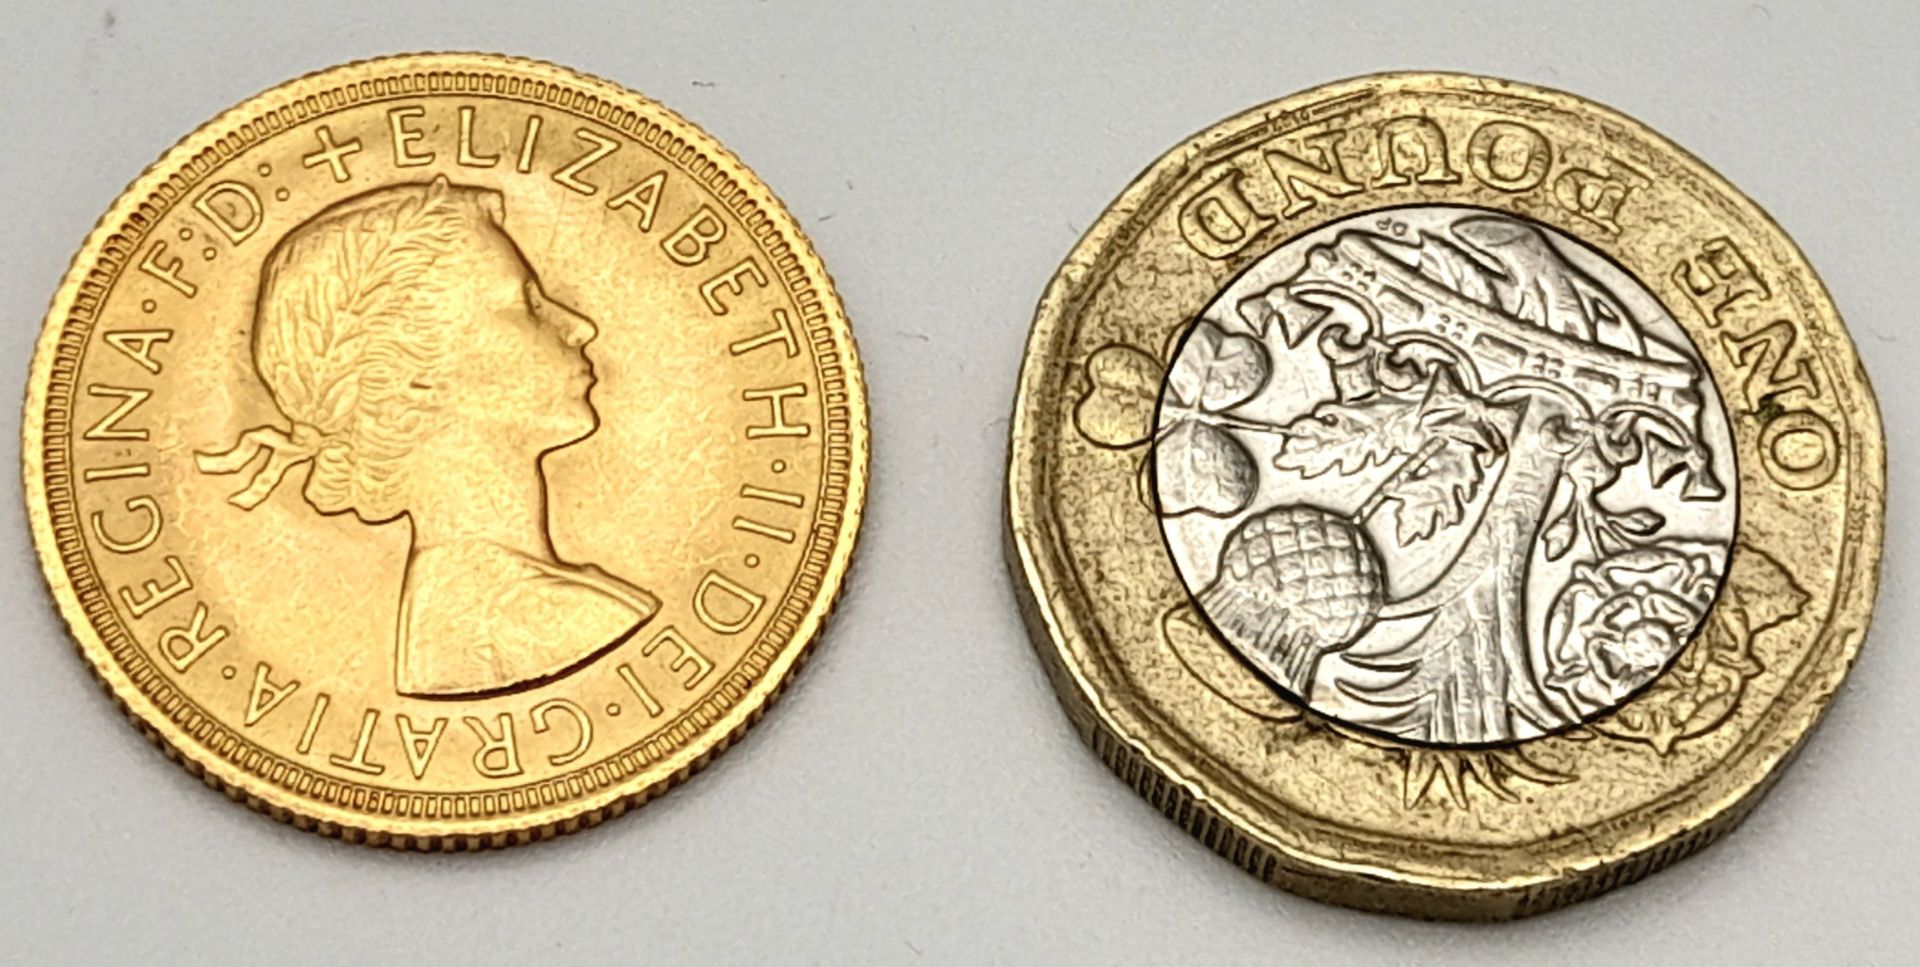 A full sovereign Queen Elizabeth II, 1967, full weight (8 g) - Image 2 of 2